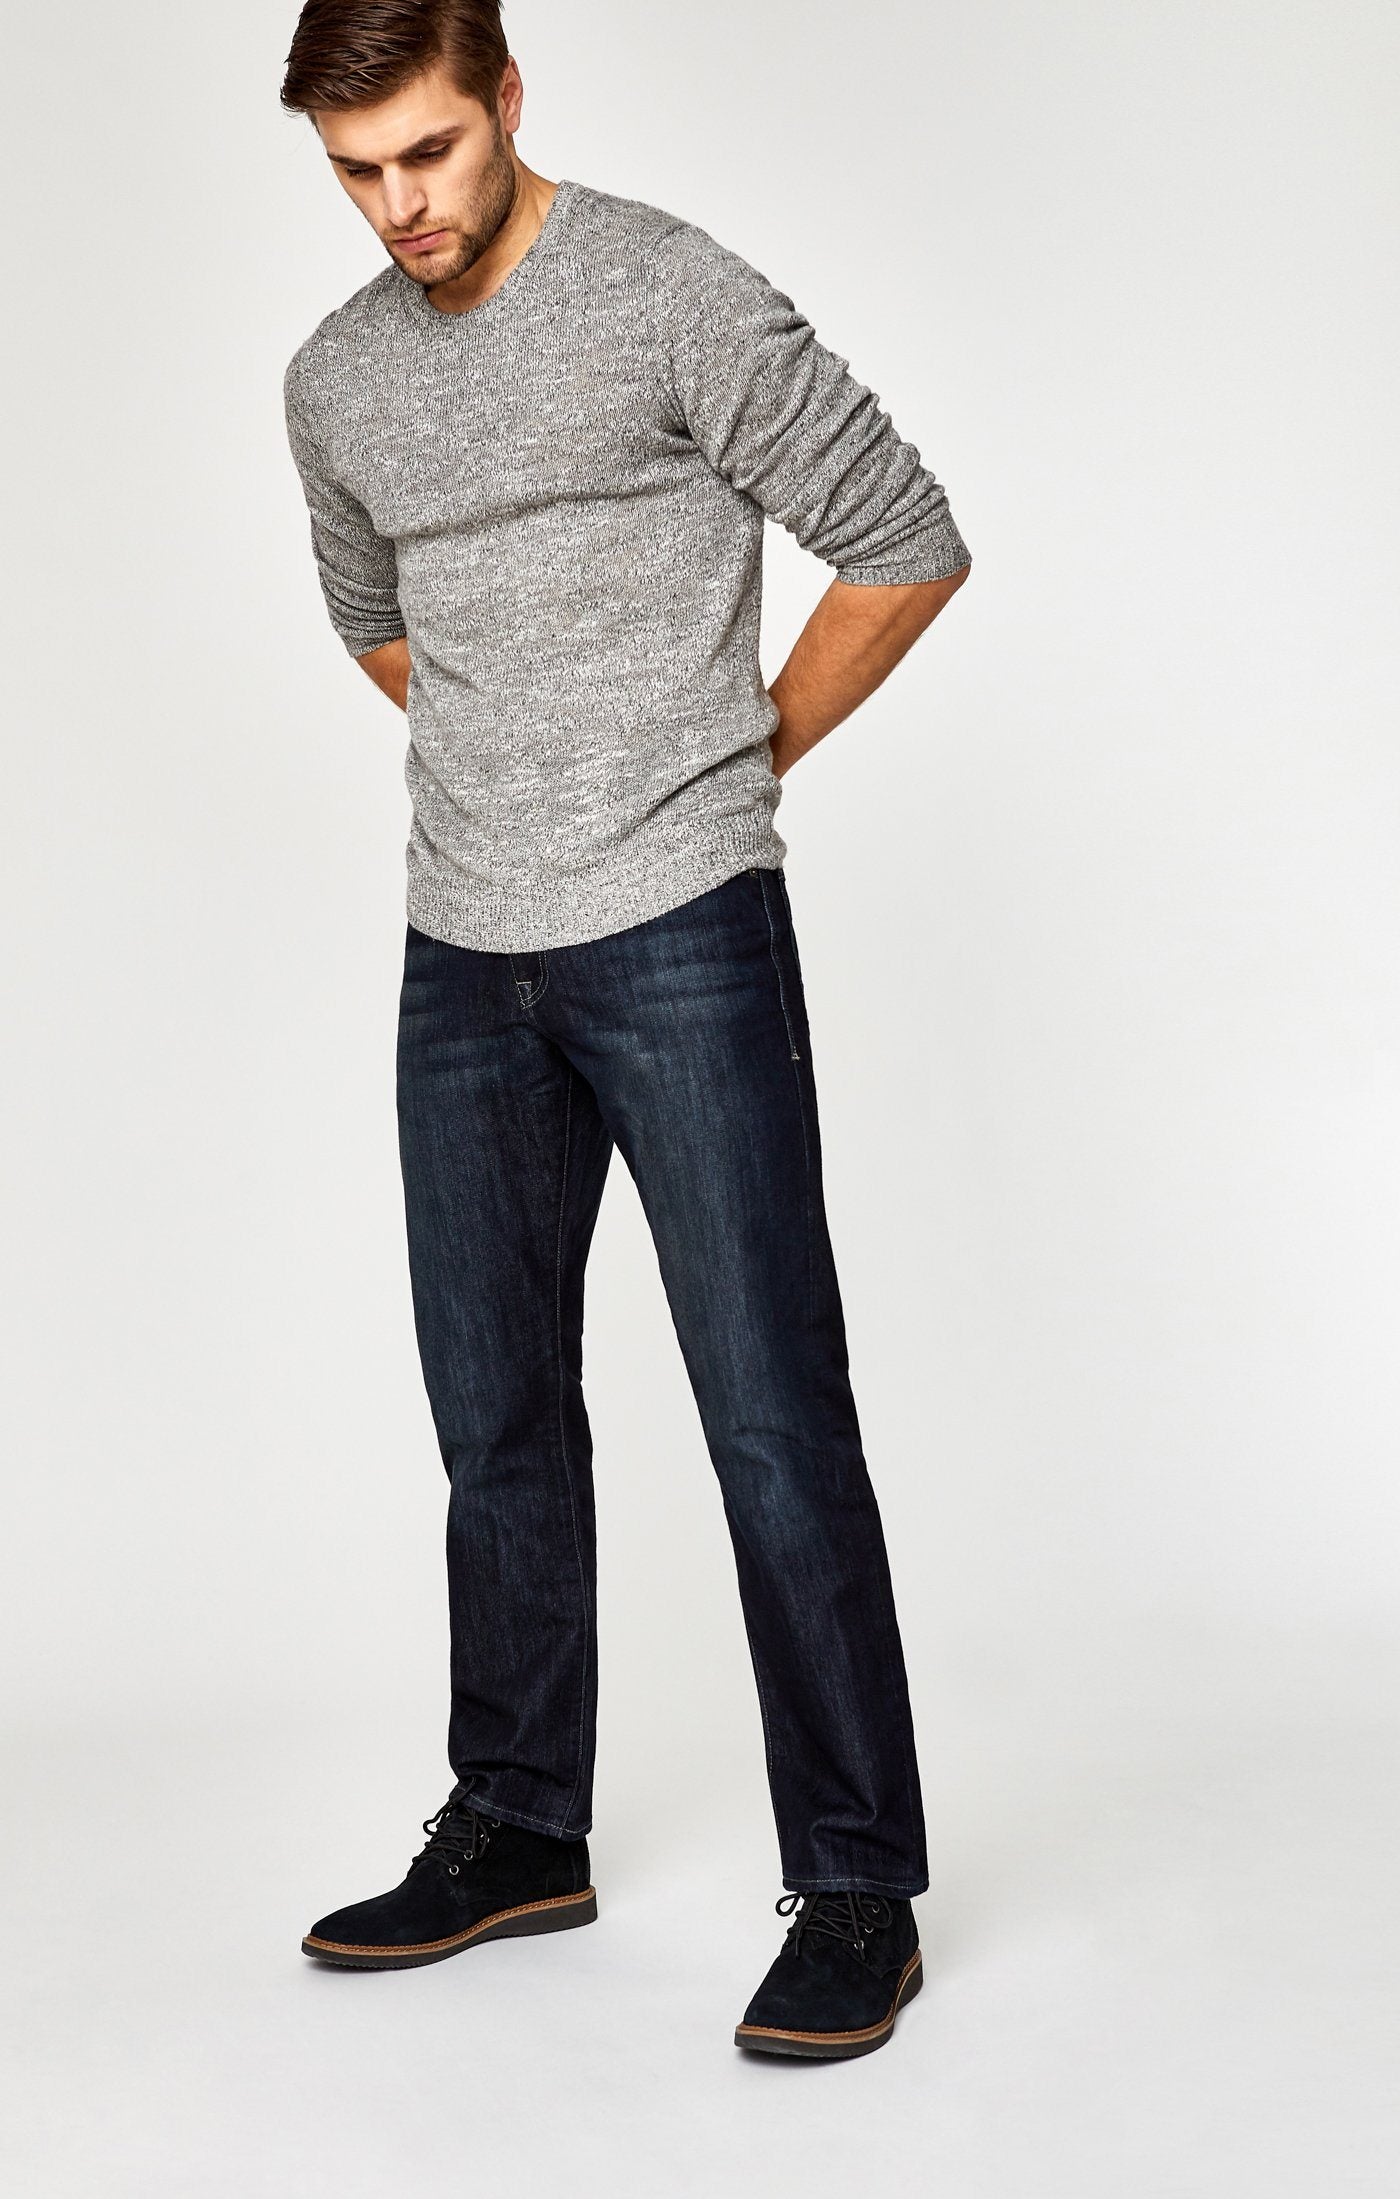 How To Find A Pair Of Jeans That Fit Just Right | Men's Jean Sizes Guide